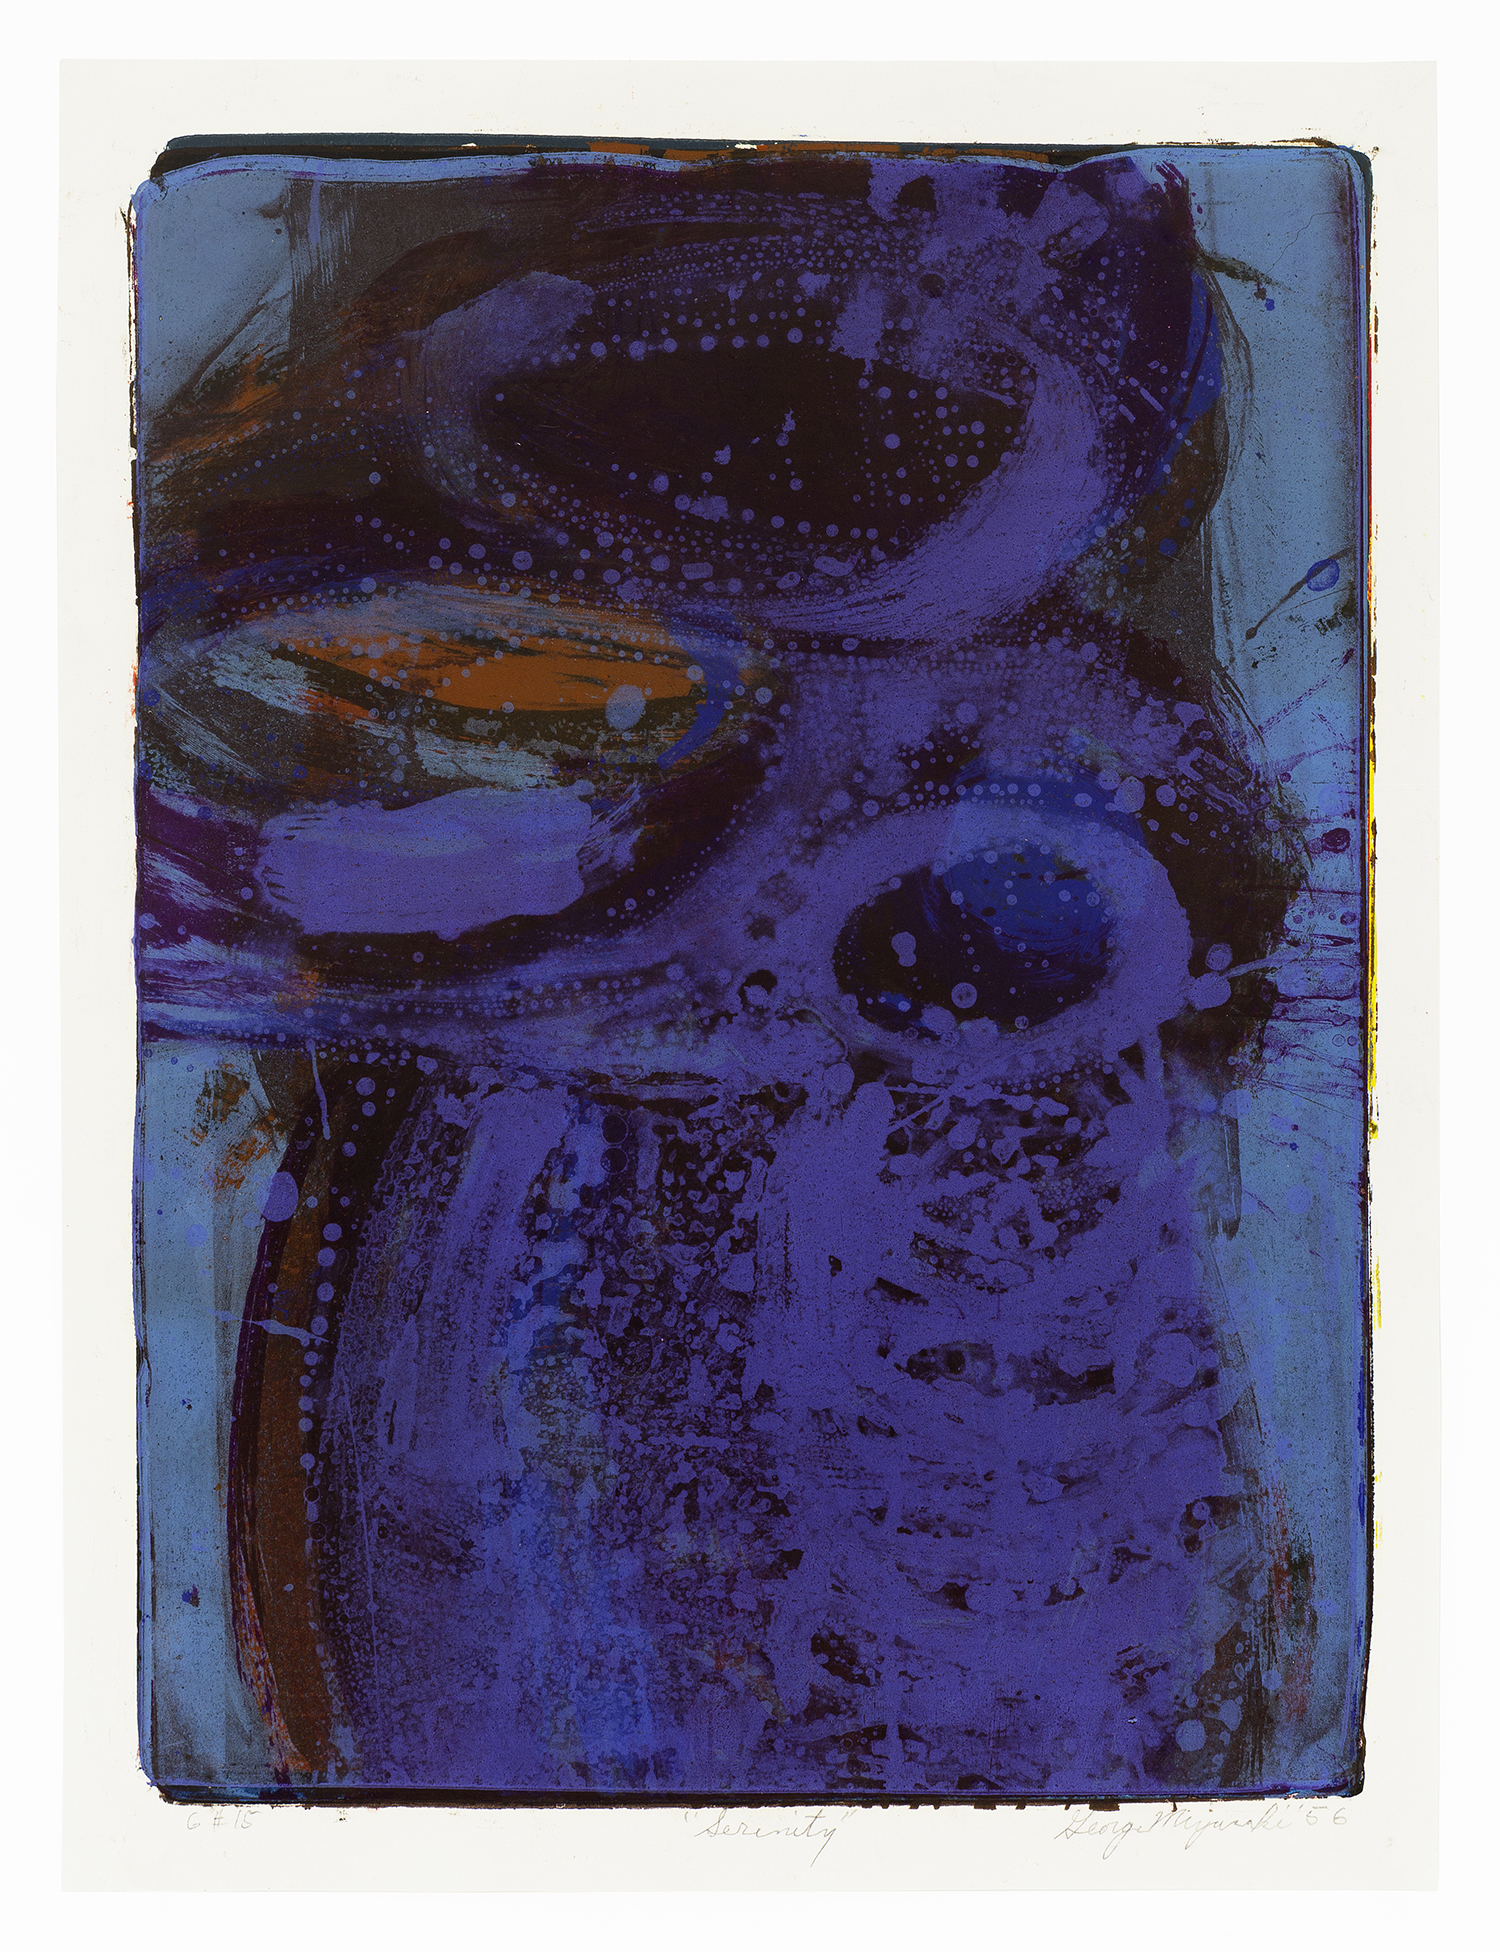 Serenity, 1956, Lithograph, 18 x 13 1/2 inches (45.7 x 34.3 cm), Edition of 15